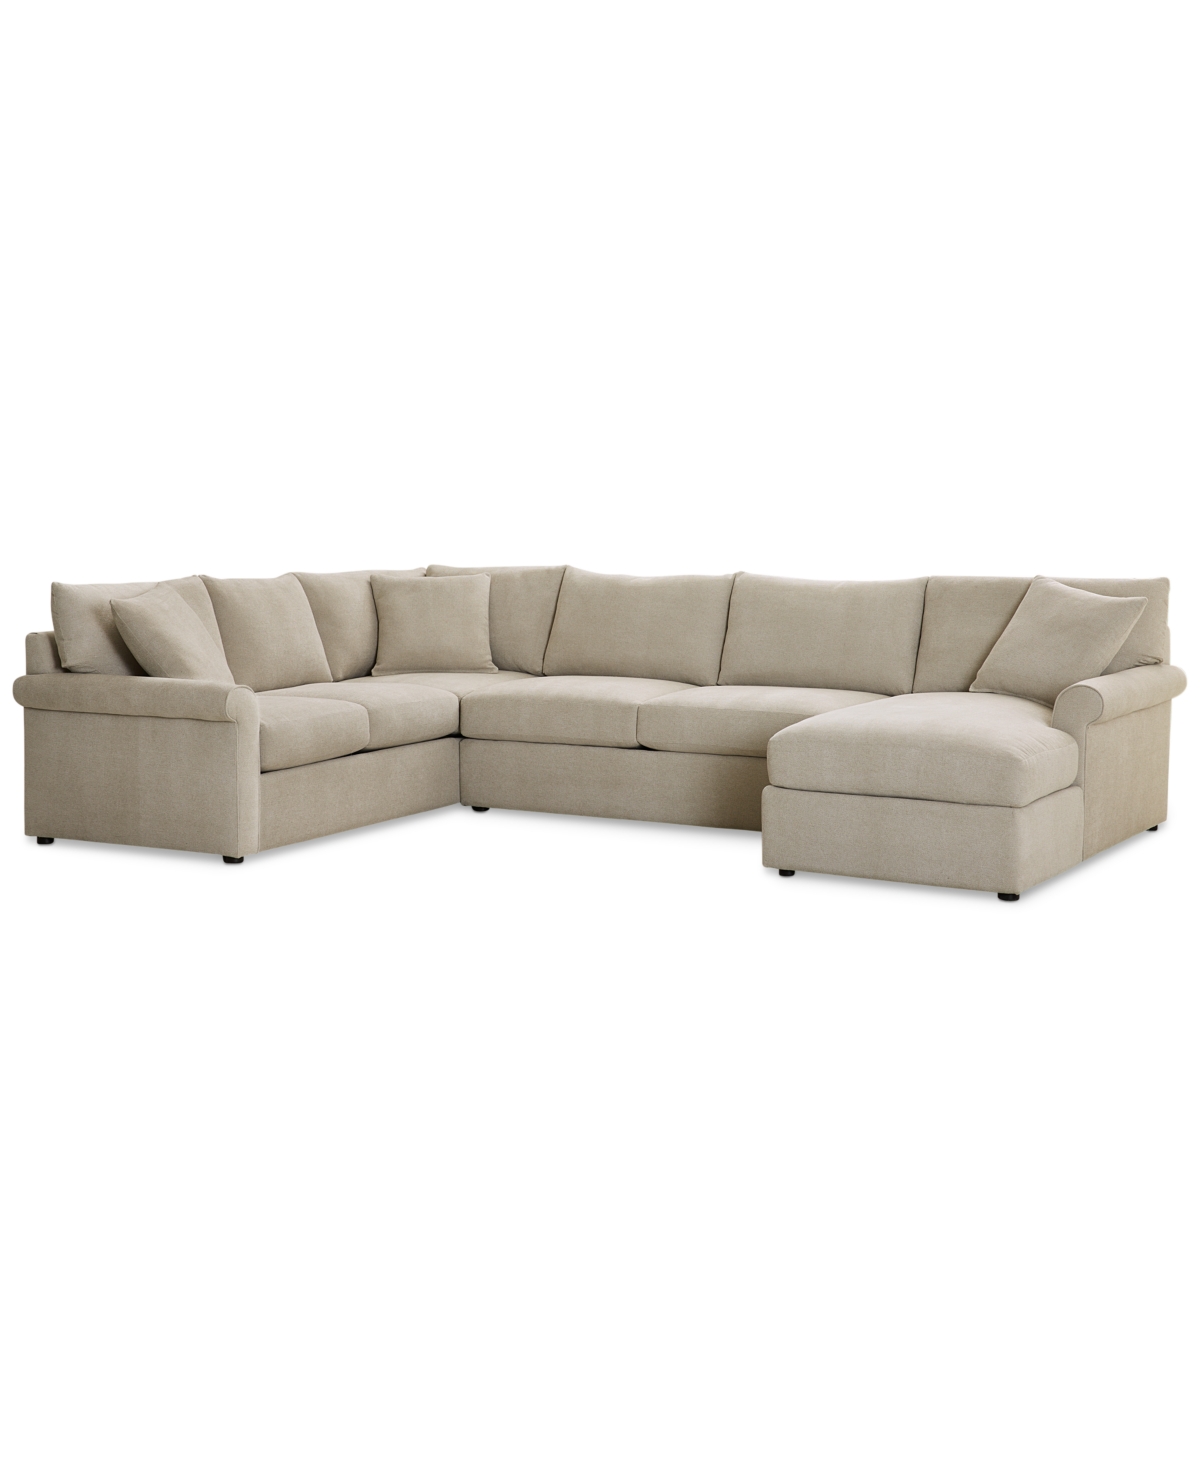 Furniture Wrenley 138" 3-pc. Fabric Sectional Chaise Sofa, Created For Macy's In Dove